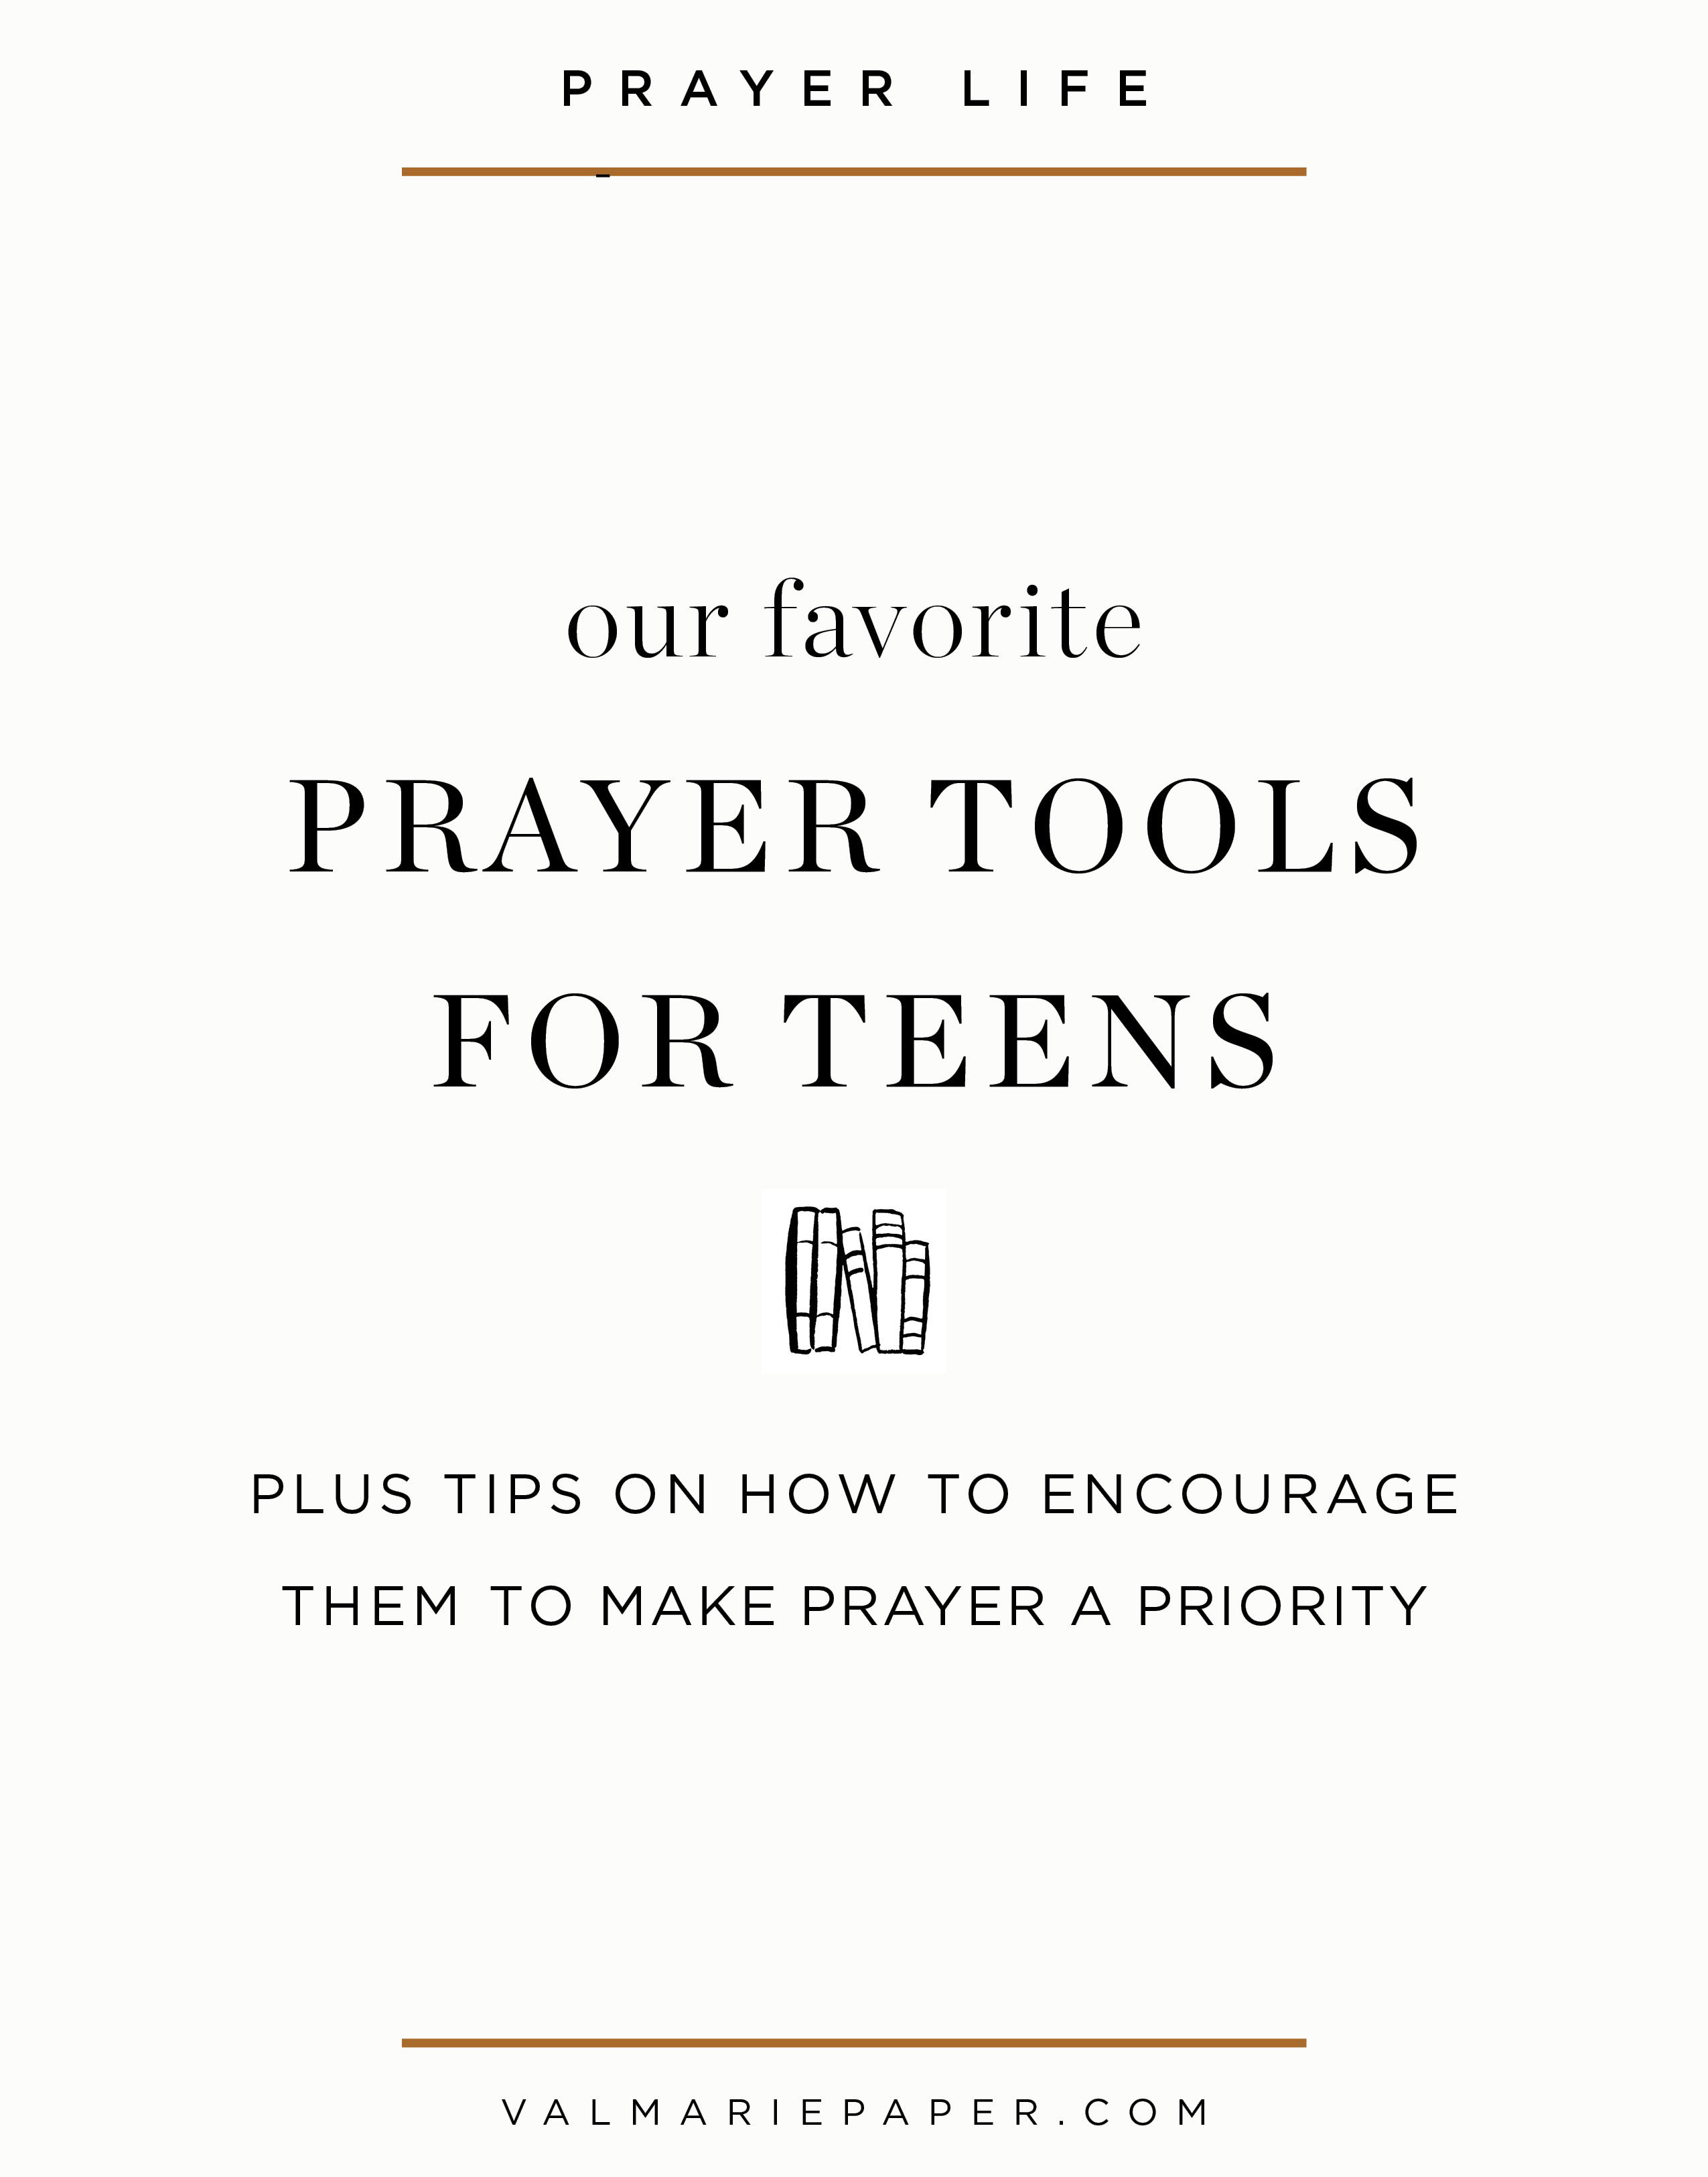 Prayer Journals for Teens by Val Marie Paper, youth group ideas, graduation gifts, Bible studies for teens, resources for youth ministers, young life, teaching kids to pray, sunday school ideas, youth small group, praying for teens